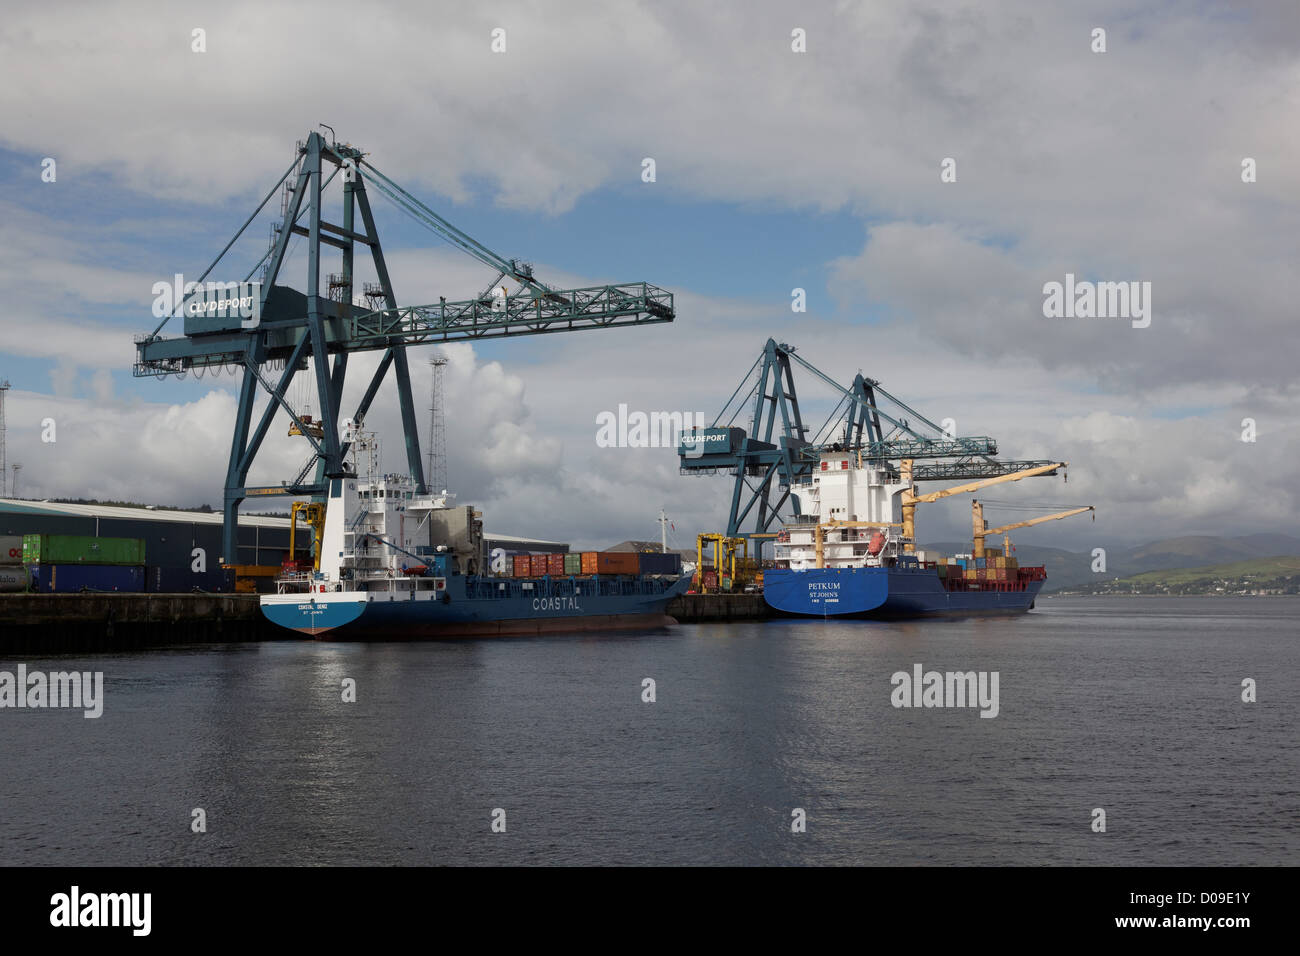 Clydeport Greenock Terminal on the River Clyde, Scotland UK Stock Photo